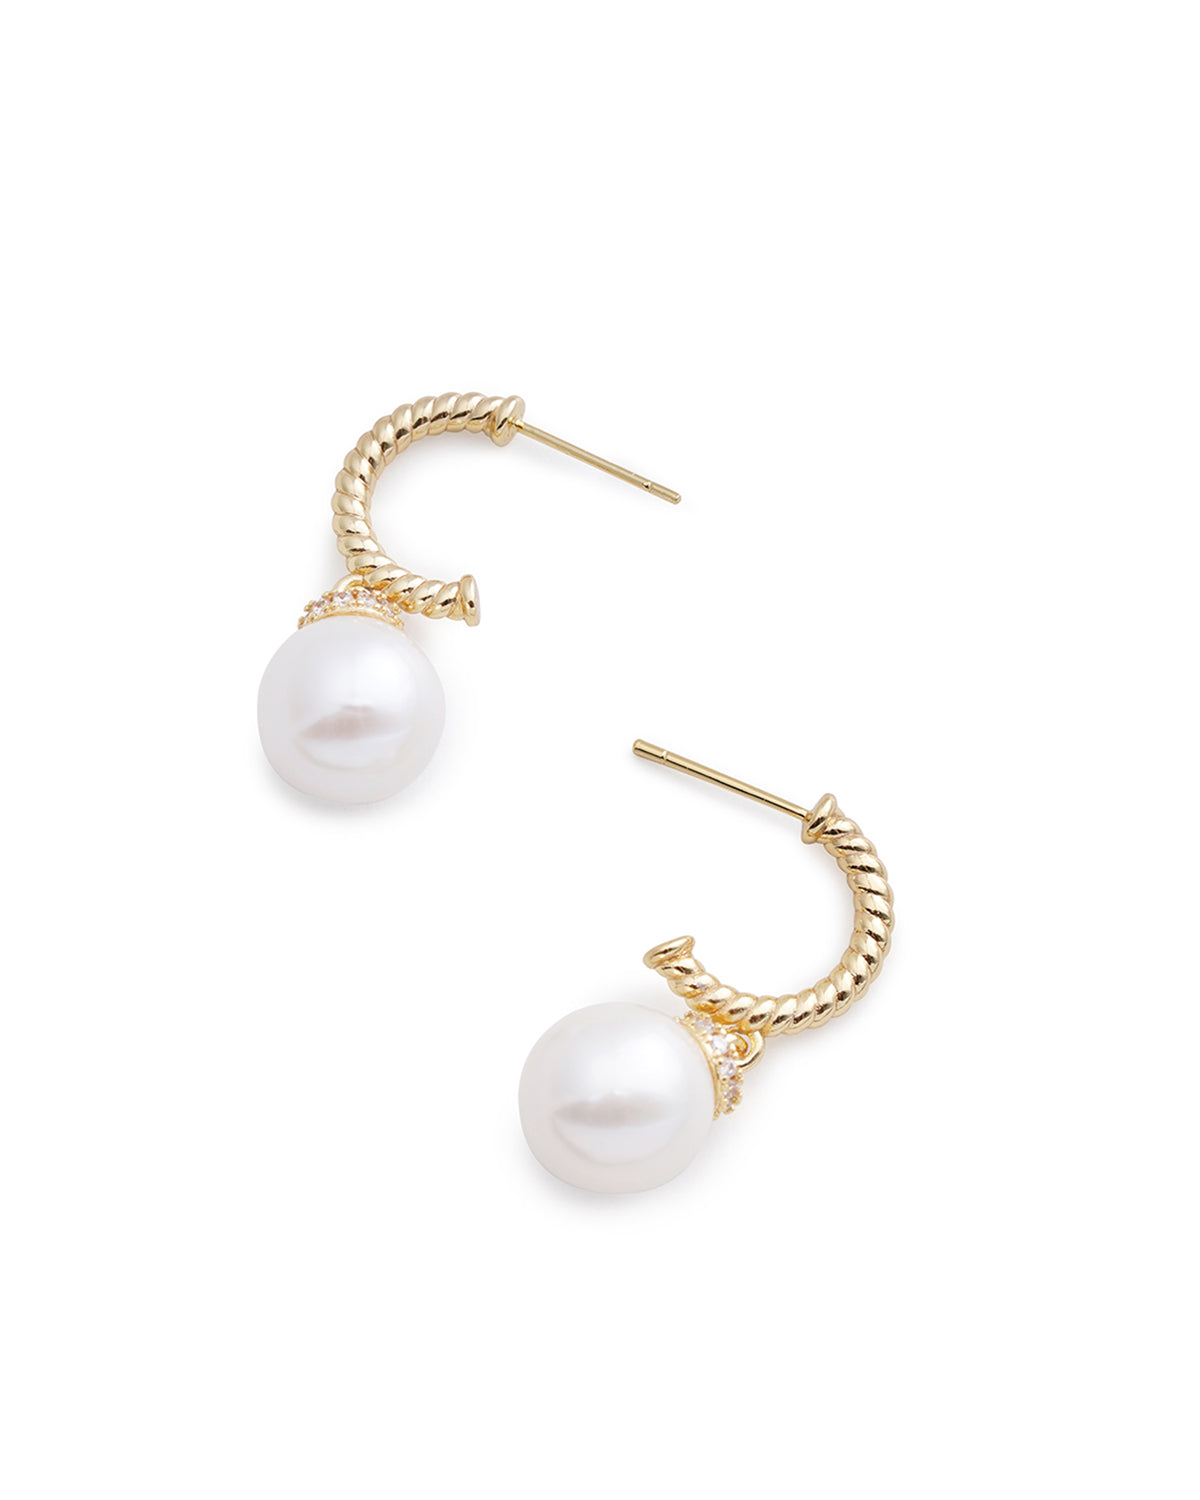 10-11mm Artificially Cultured Round Freshwater Pearl Rattan Pattern Crystal Drop Earrings